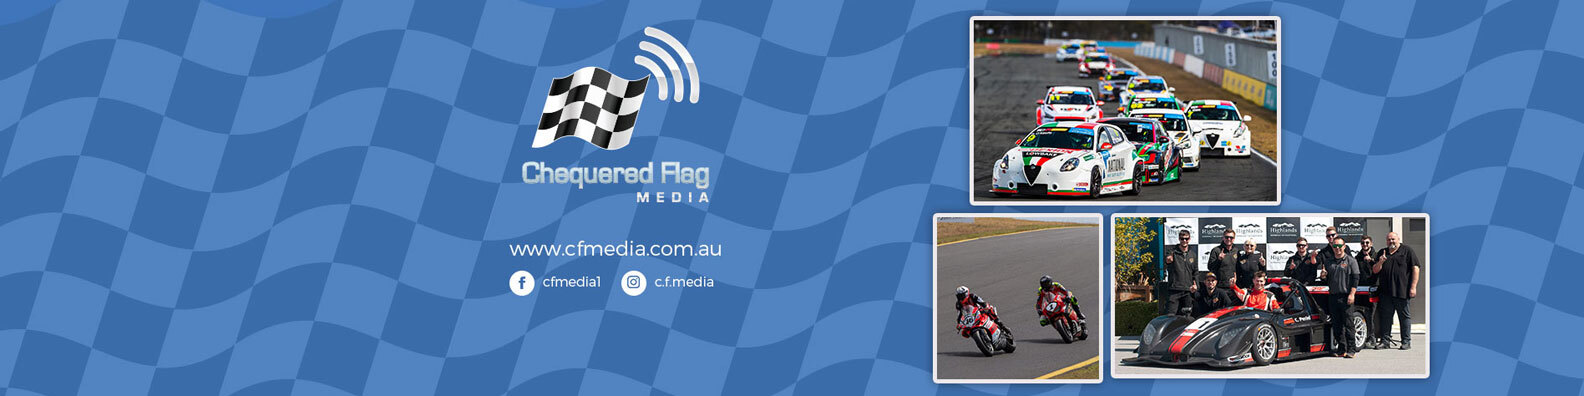 Chequered Flag Chat